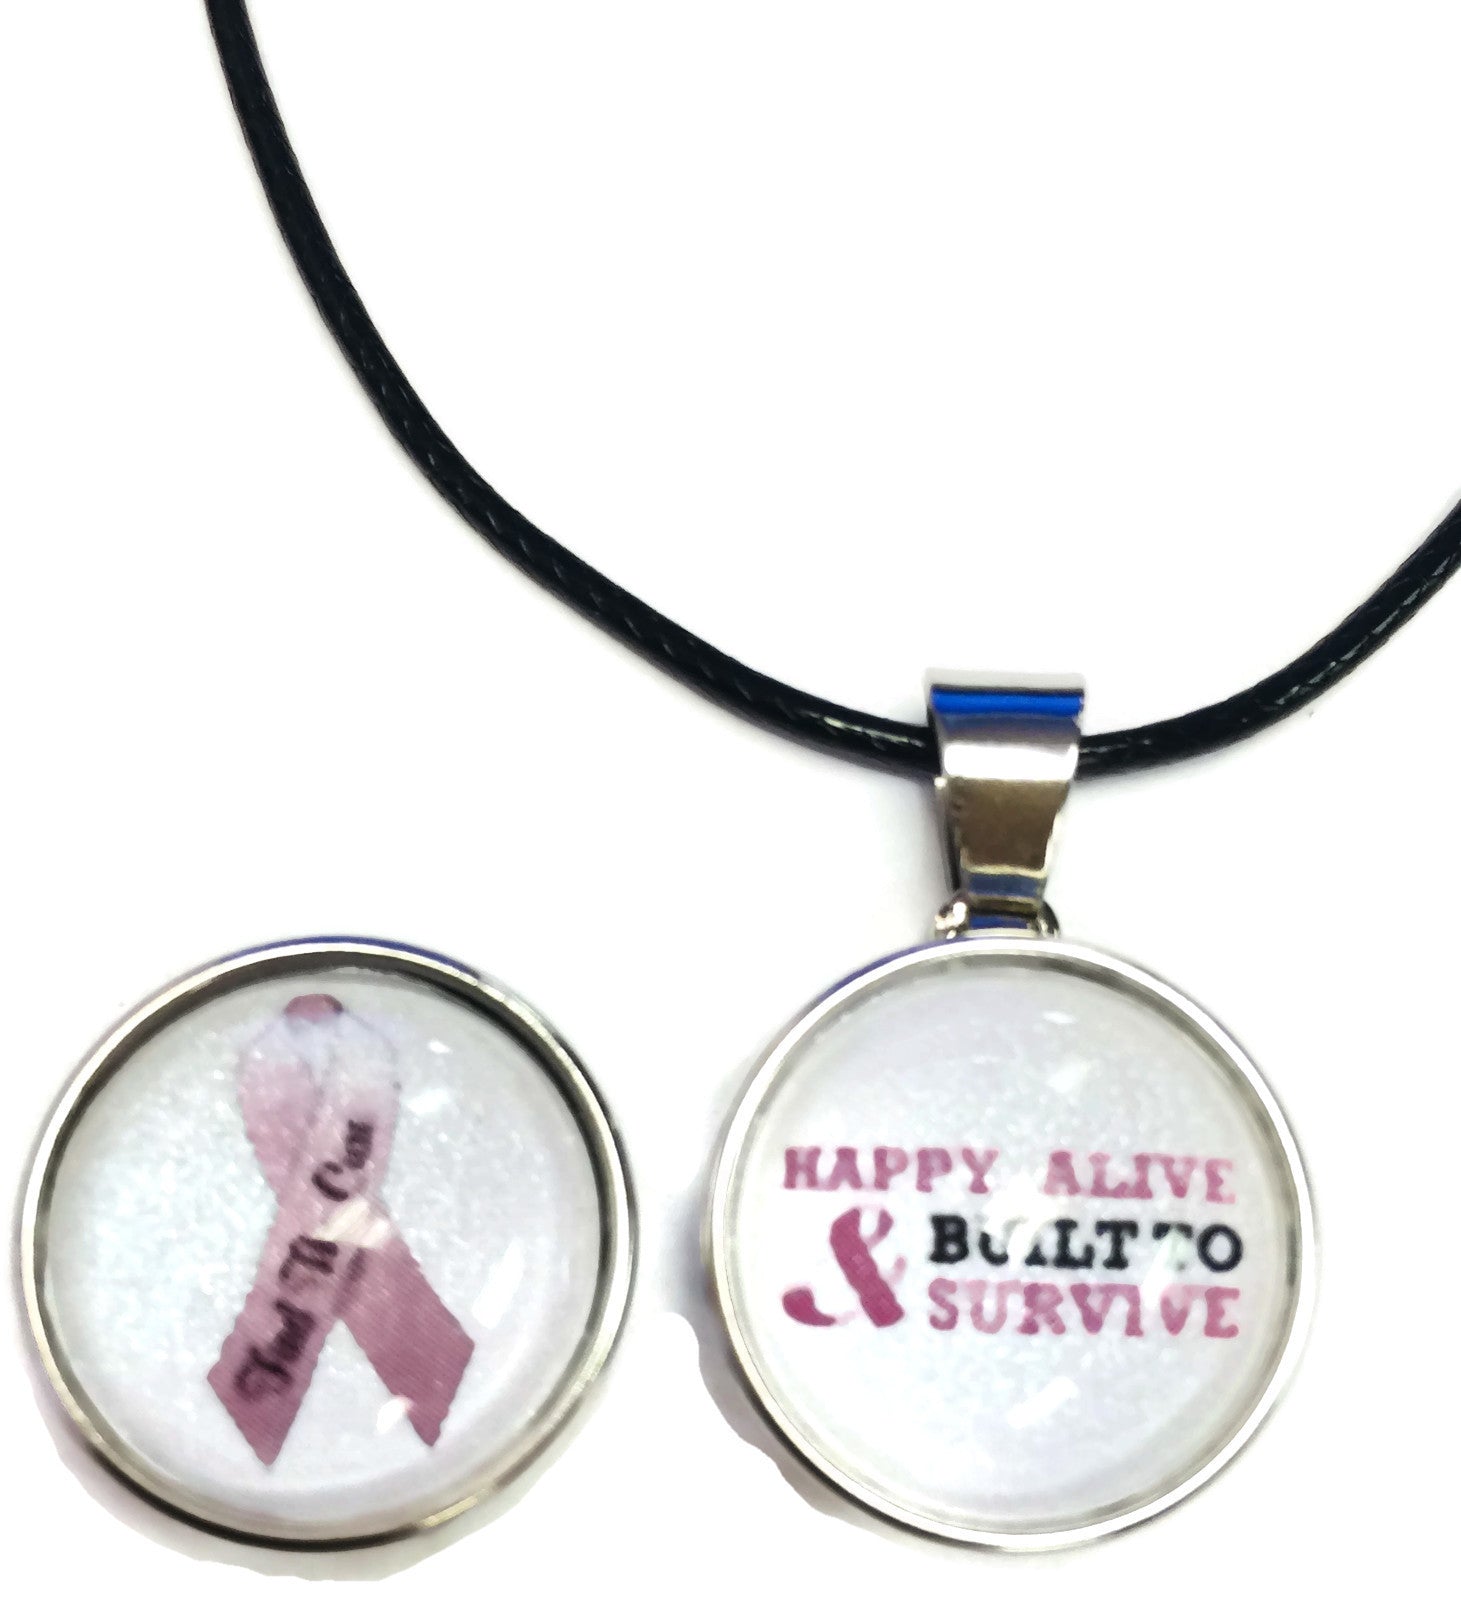 Find The Cure Built To Survive Breast Cancer Awareness Hope For 